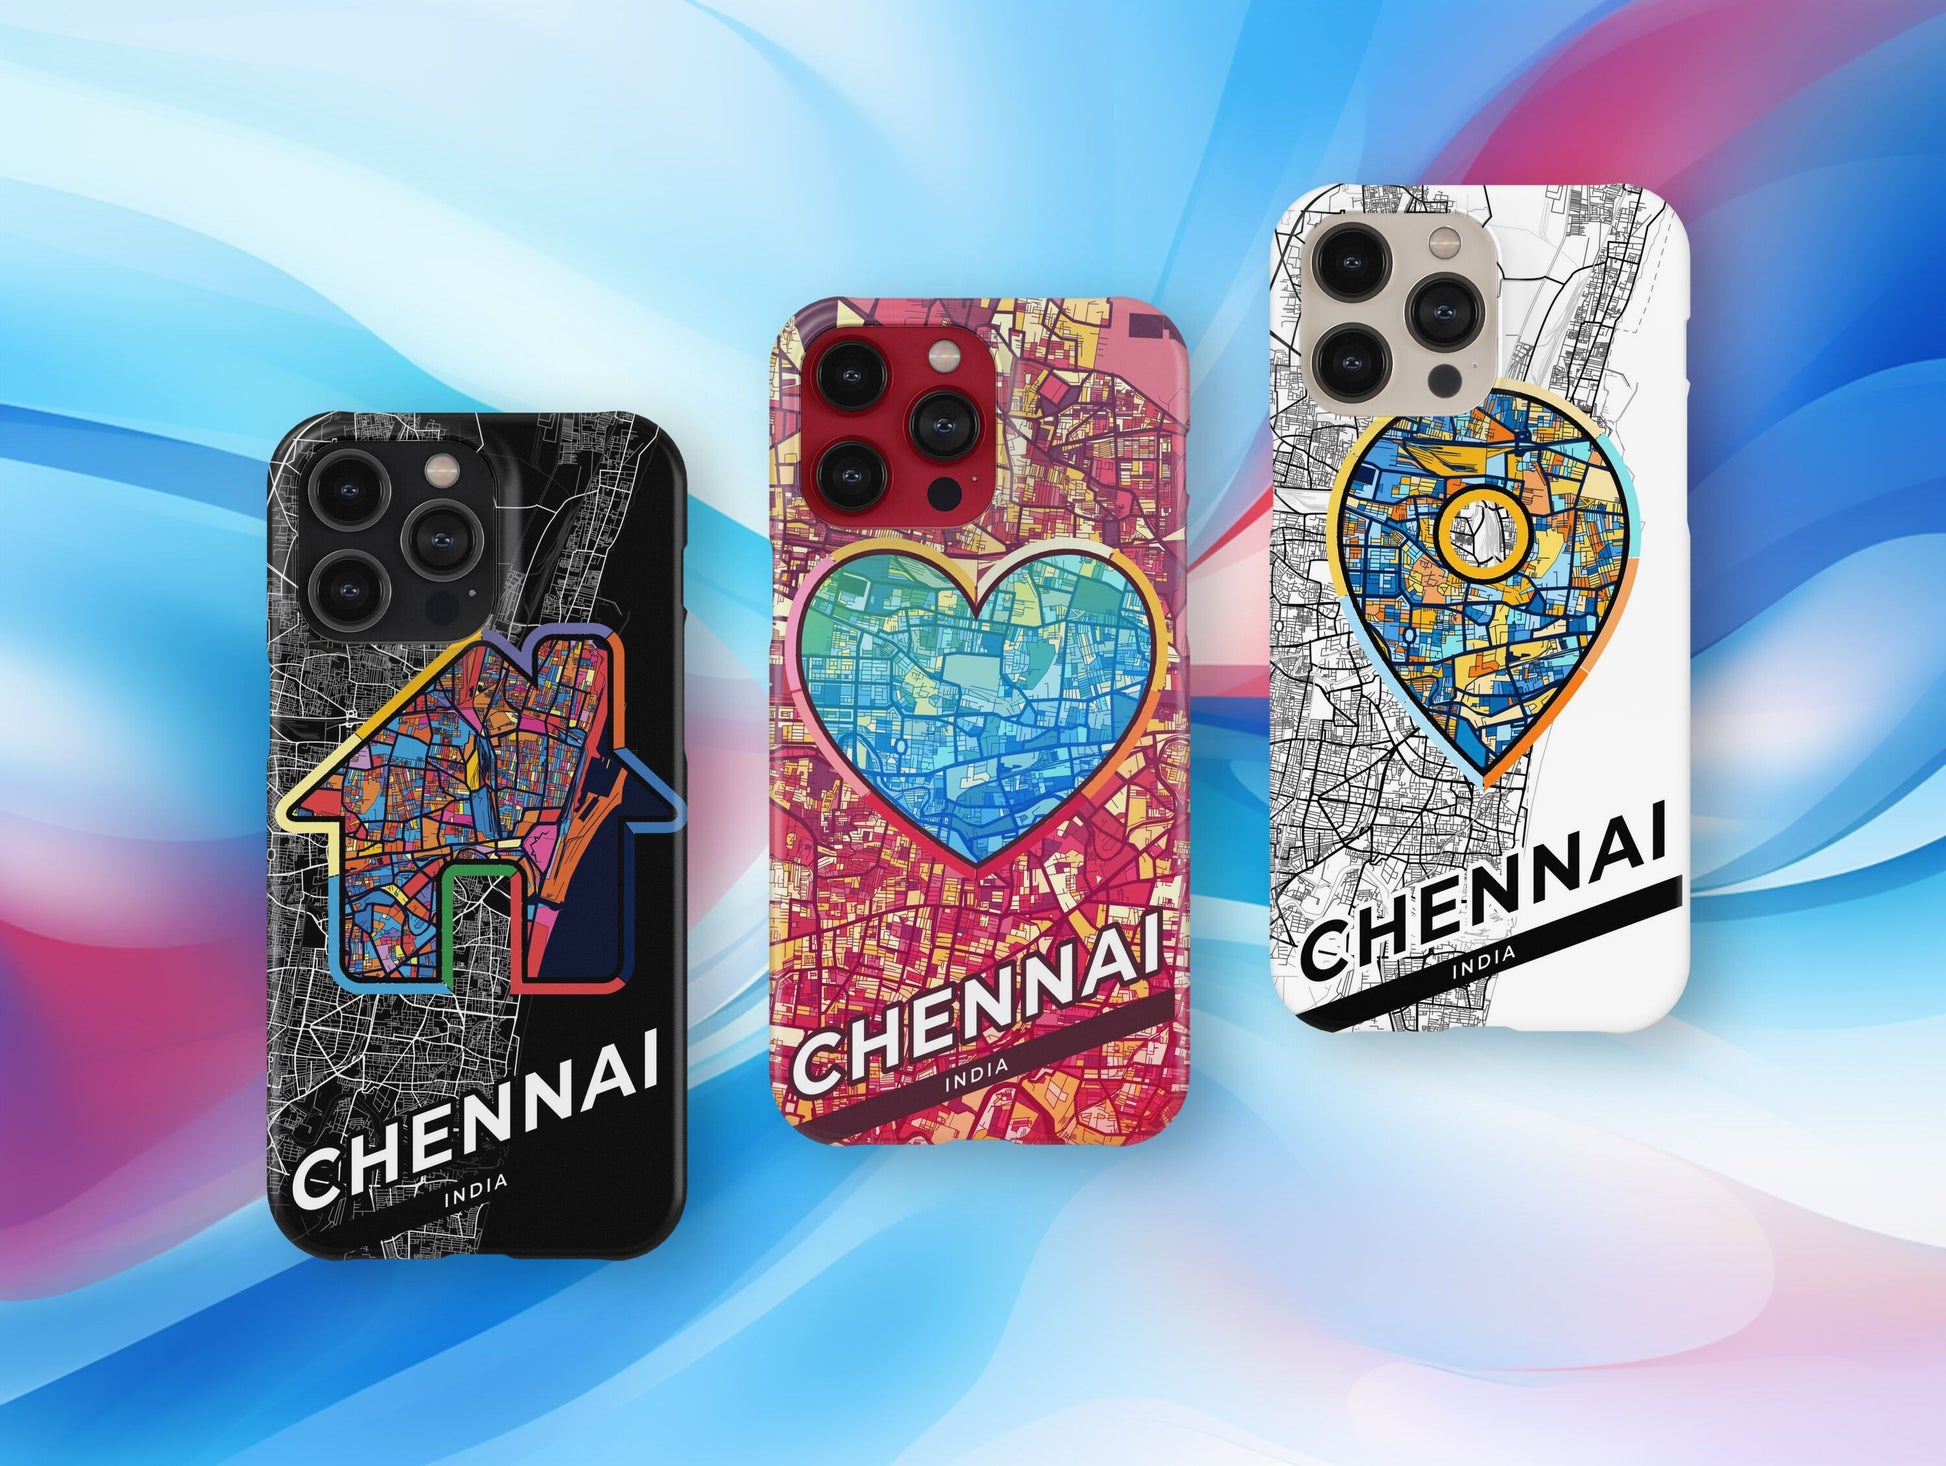 Chennai India slim phone case with colorful icon. Birthday, wedding or housewarming gift. Couple match cases.